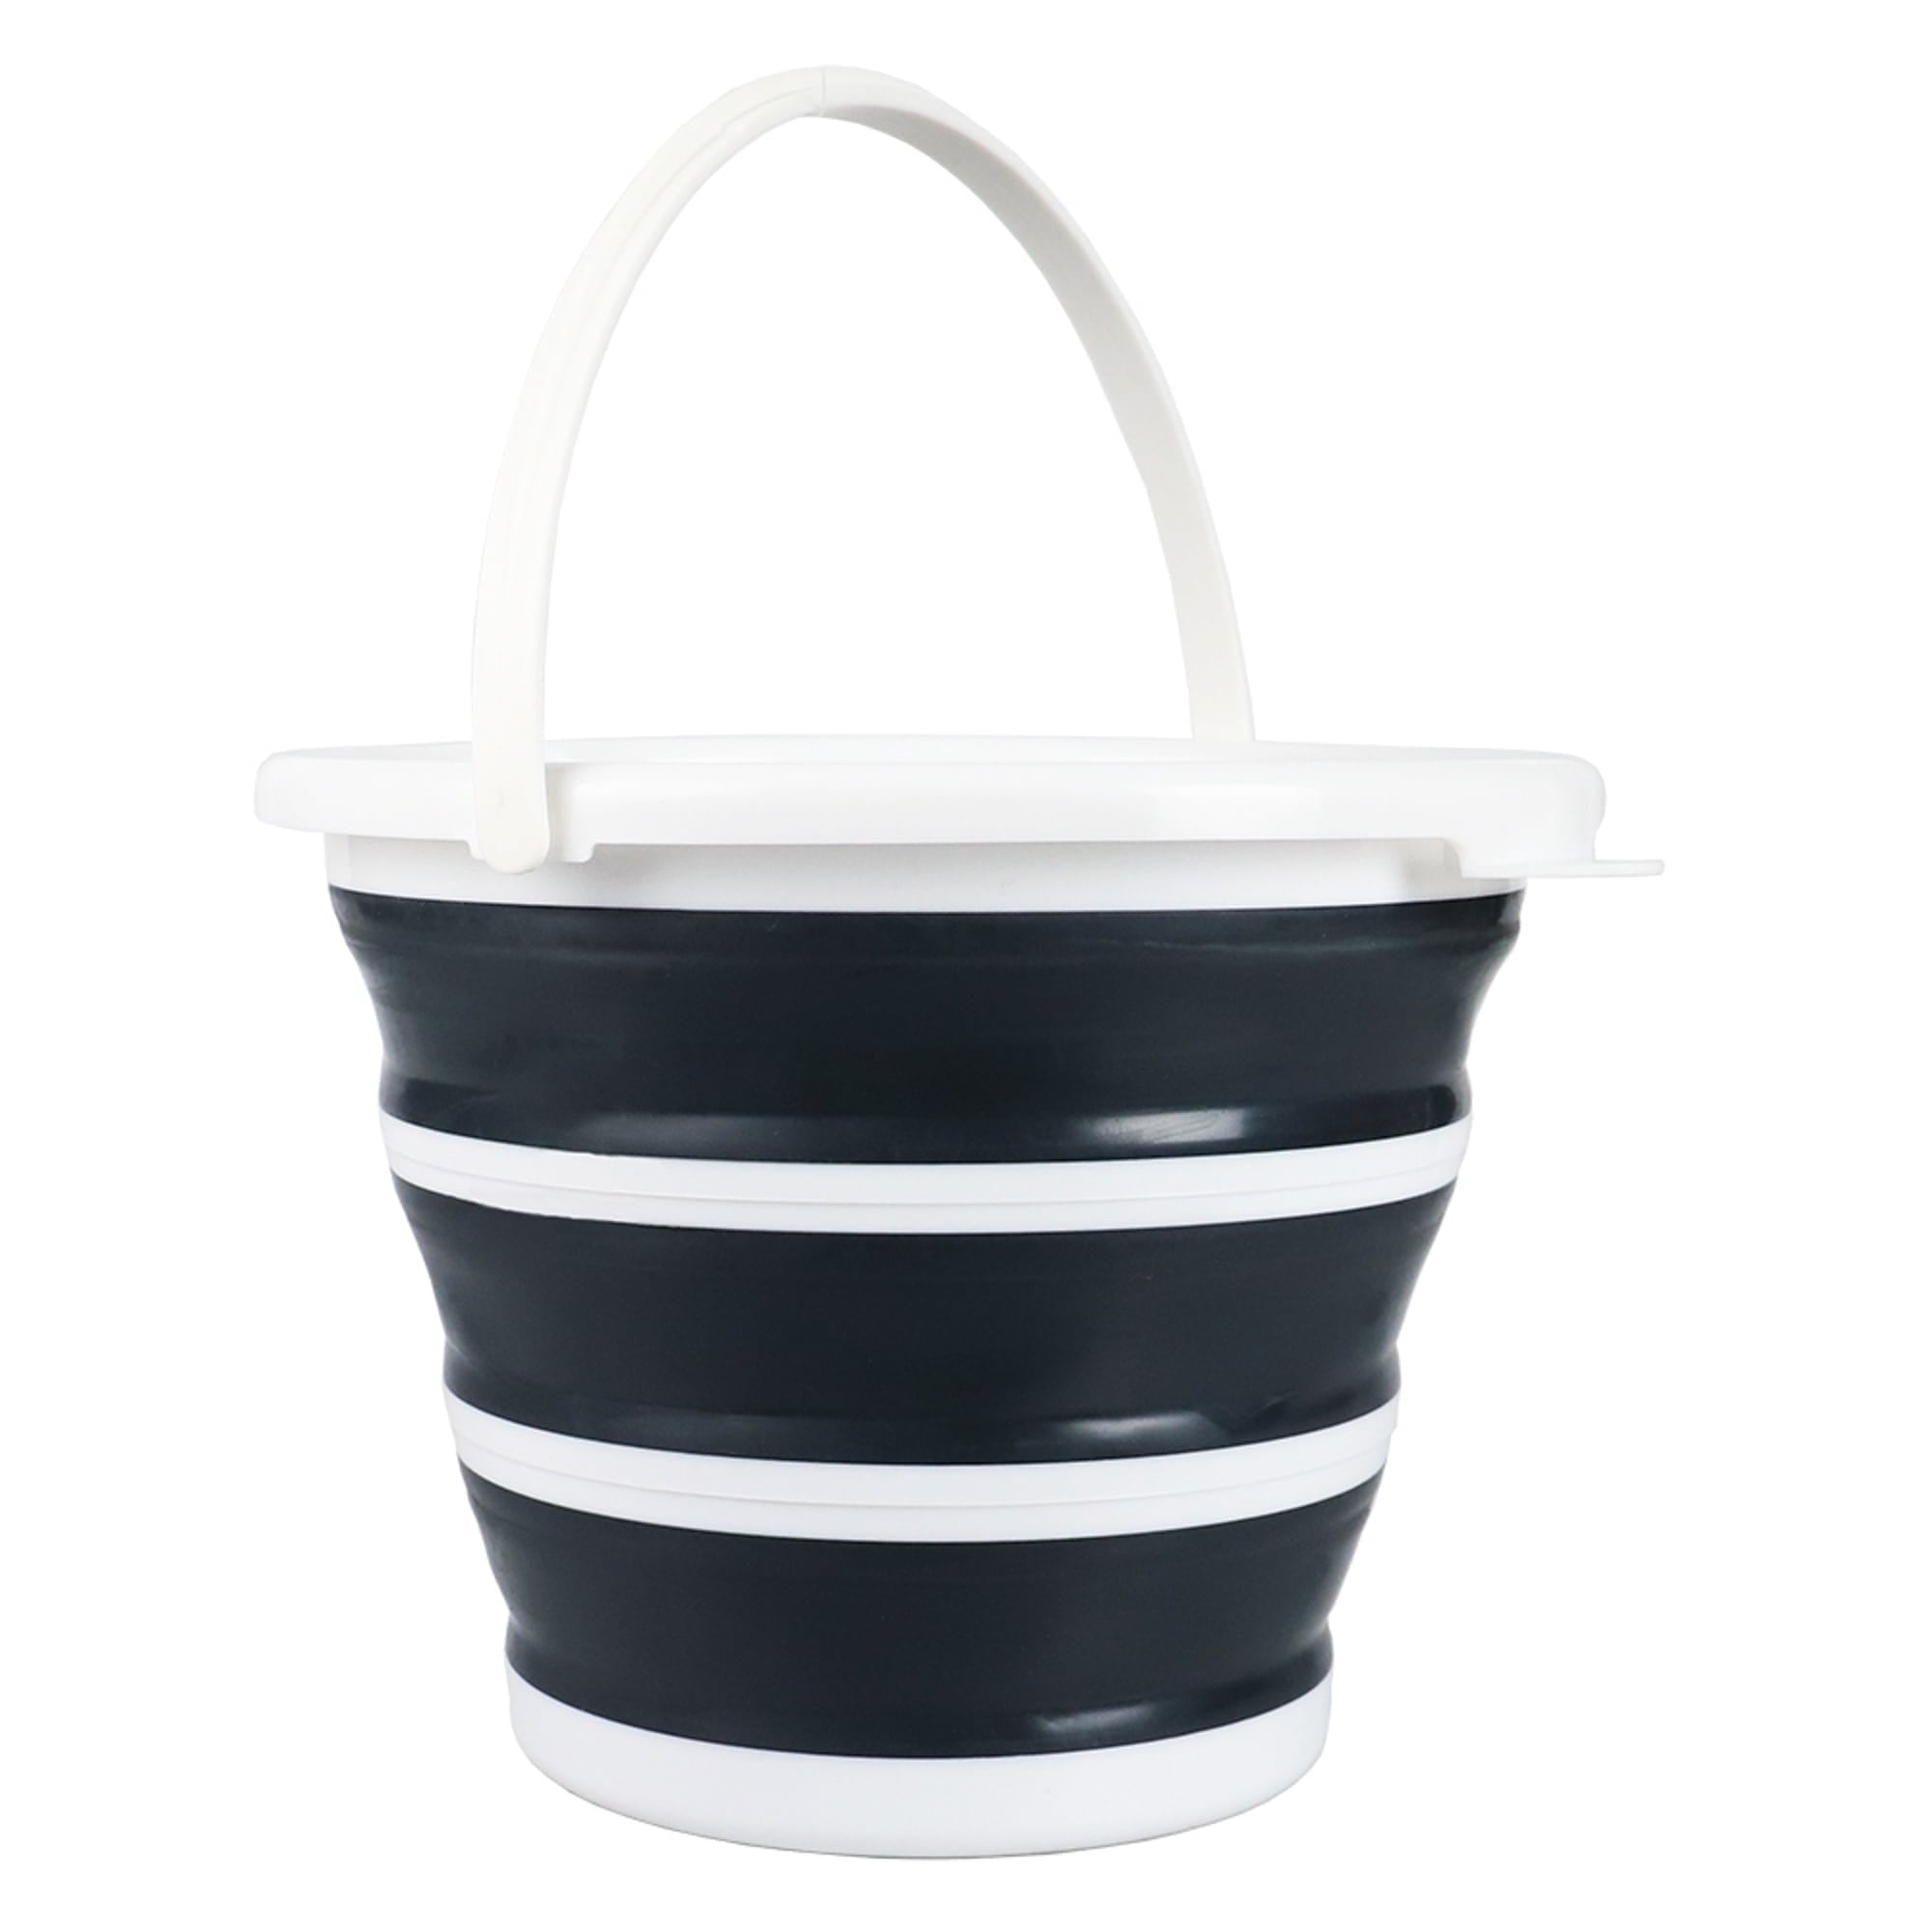 Home Basics 2.6 Gallon Collapsible Plastic/Silicone Bucket with Extended Carrying Handle, Black $5.00 EACH, CASE PACK OF 12